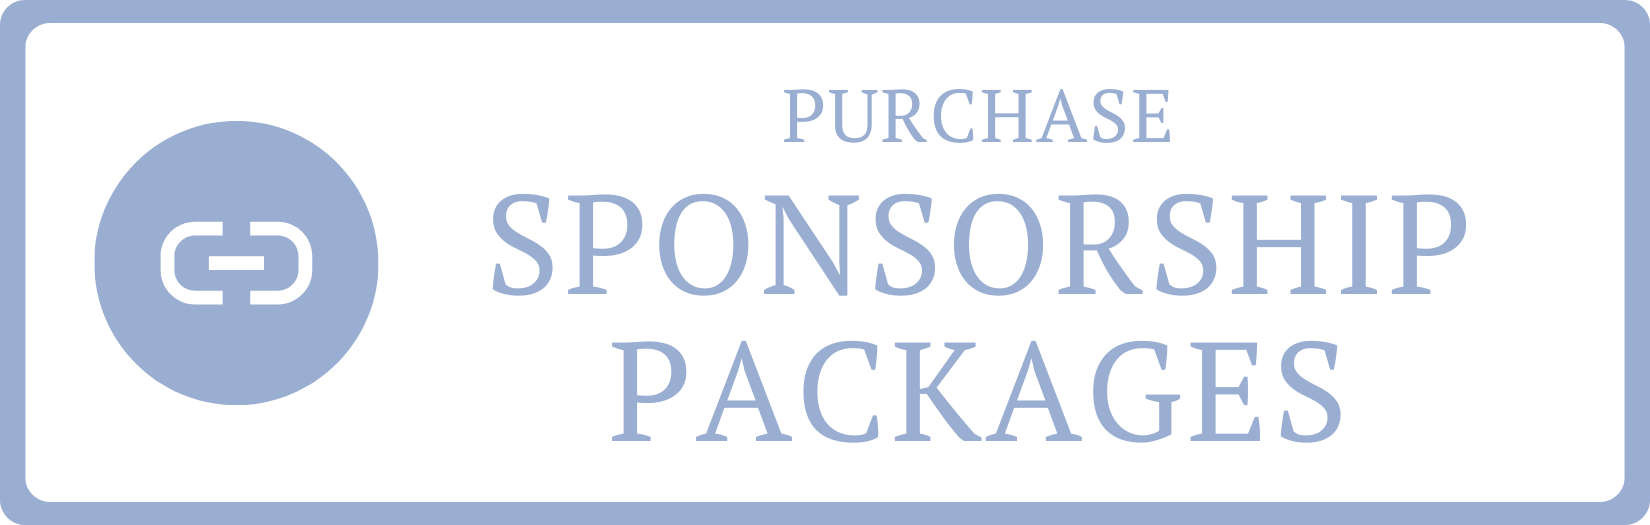 Sponsorship Packages button